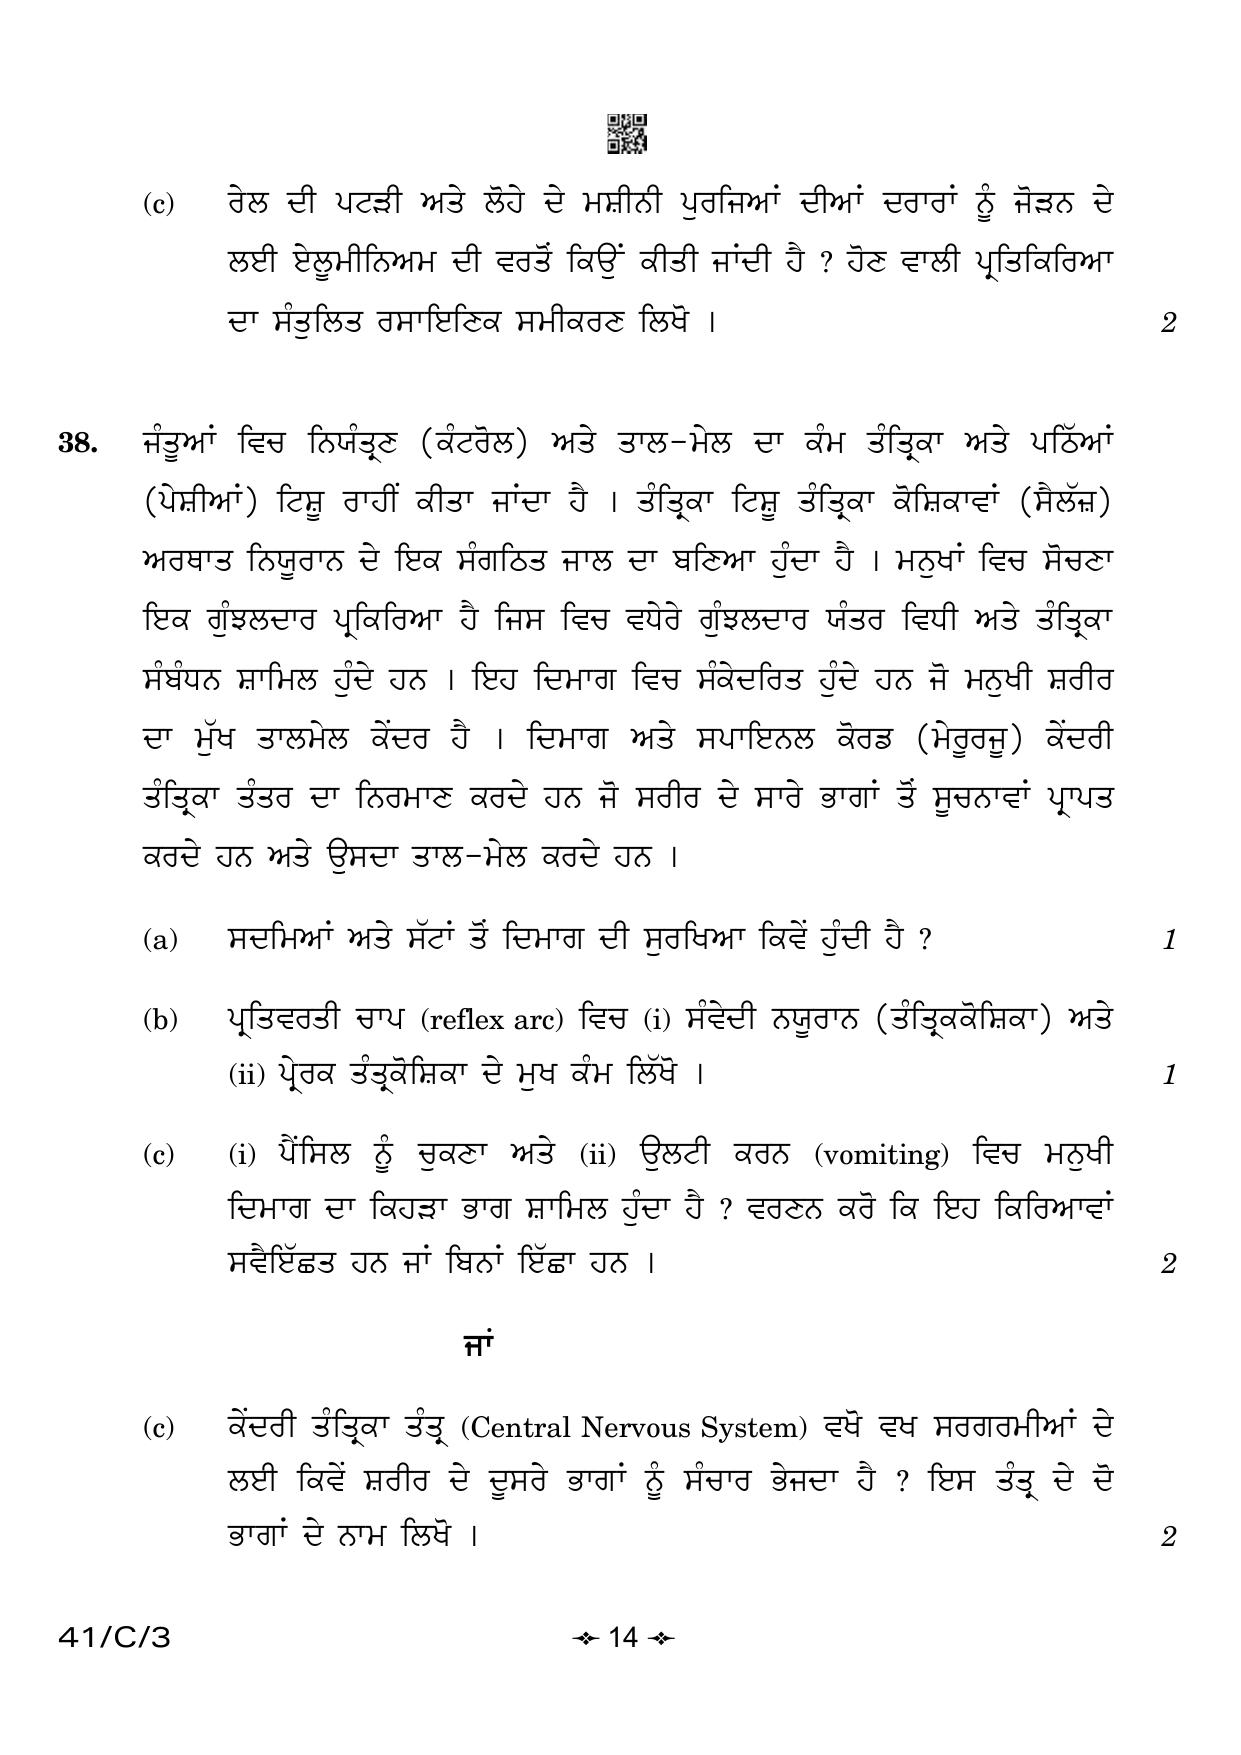 CBSE Class 10 41-3 Science Punjabi 2023 (Compartment) Question Paper - Page 14